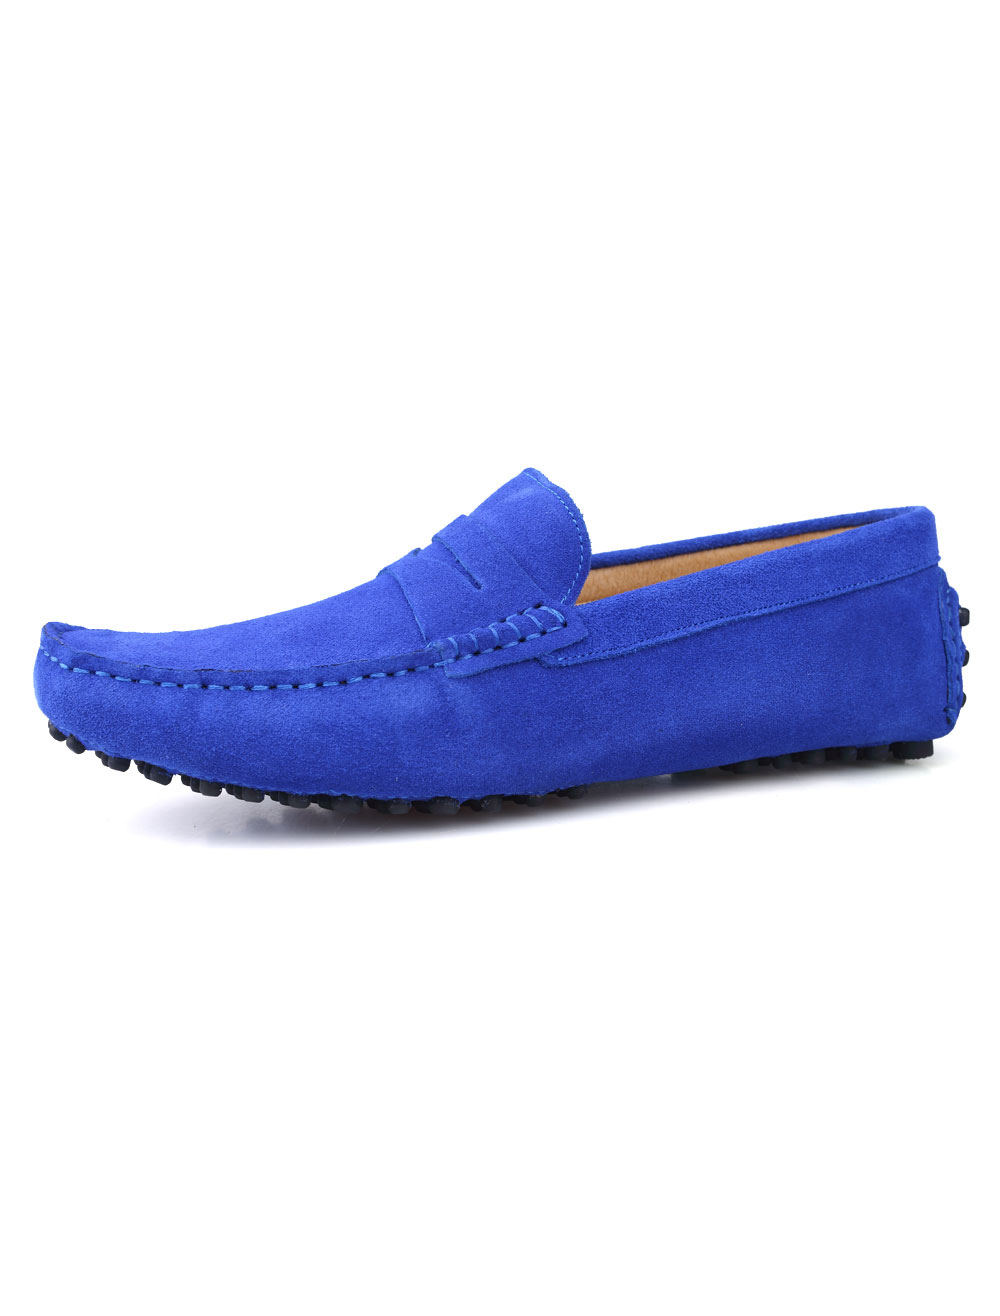 Royal Blue Cowhide Loafers Casual Shoes 